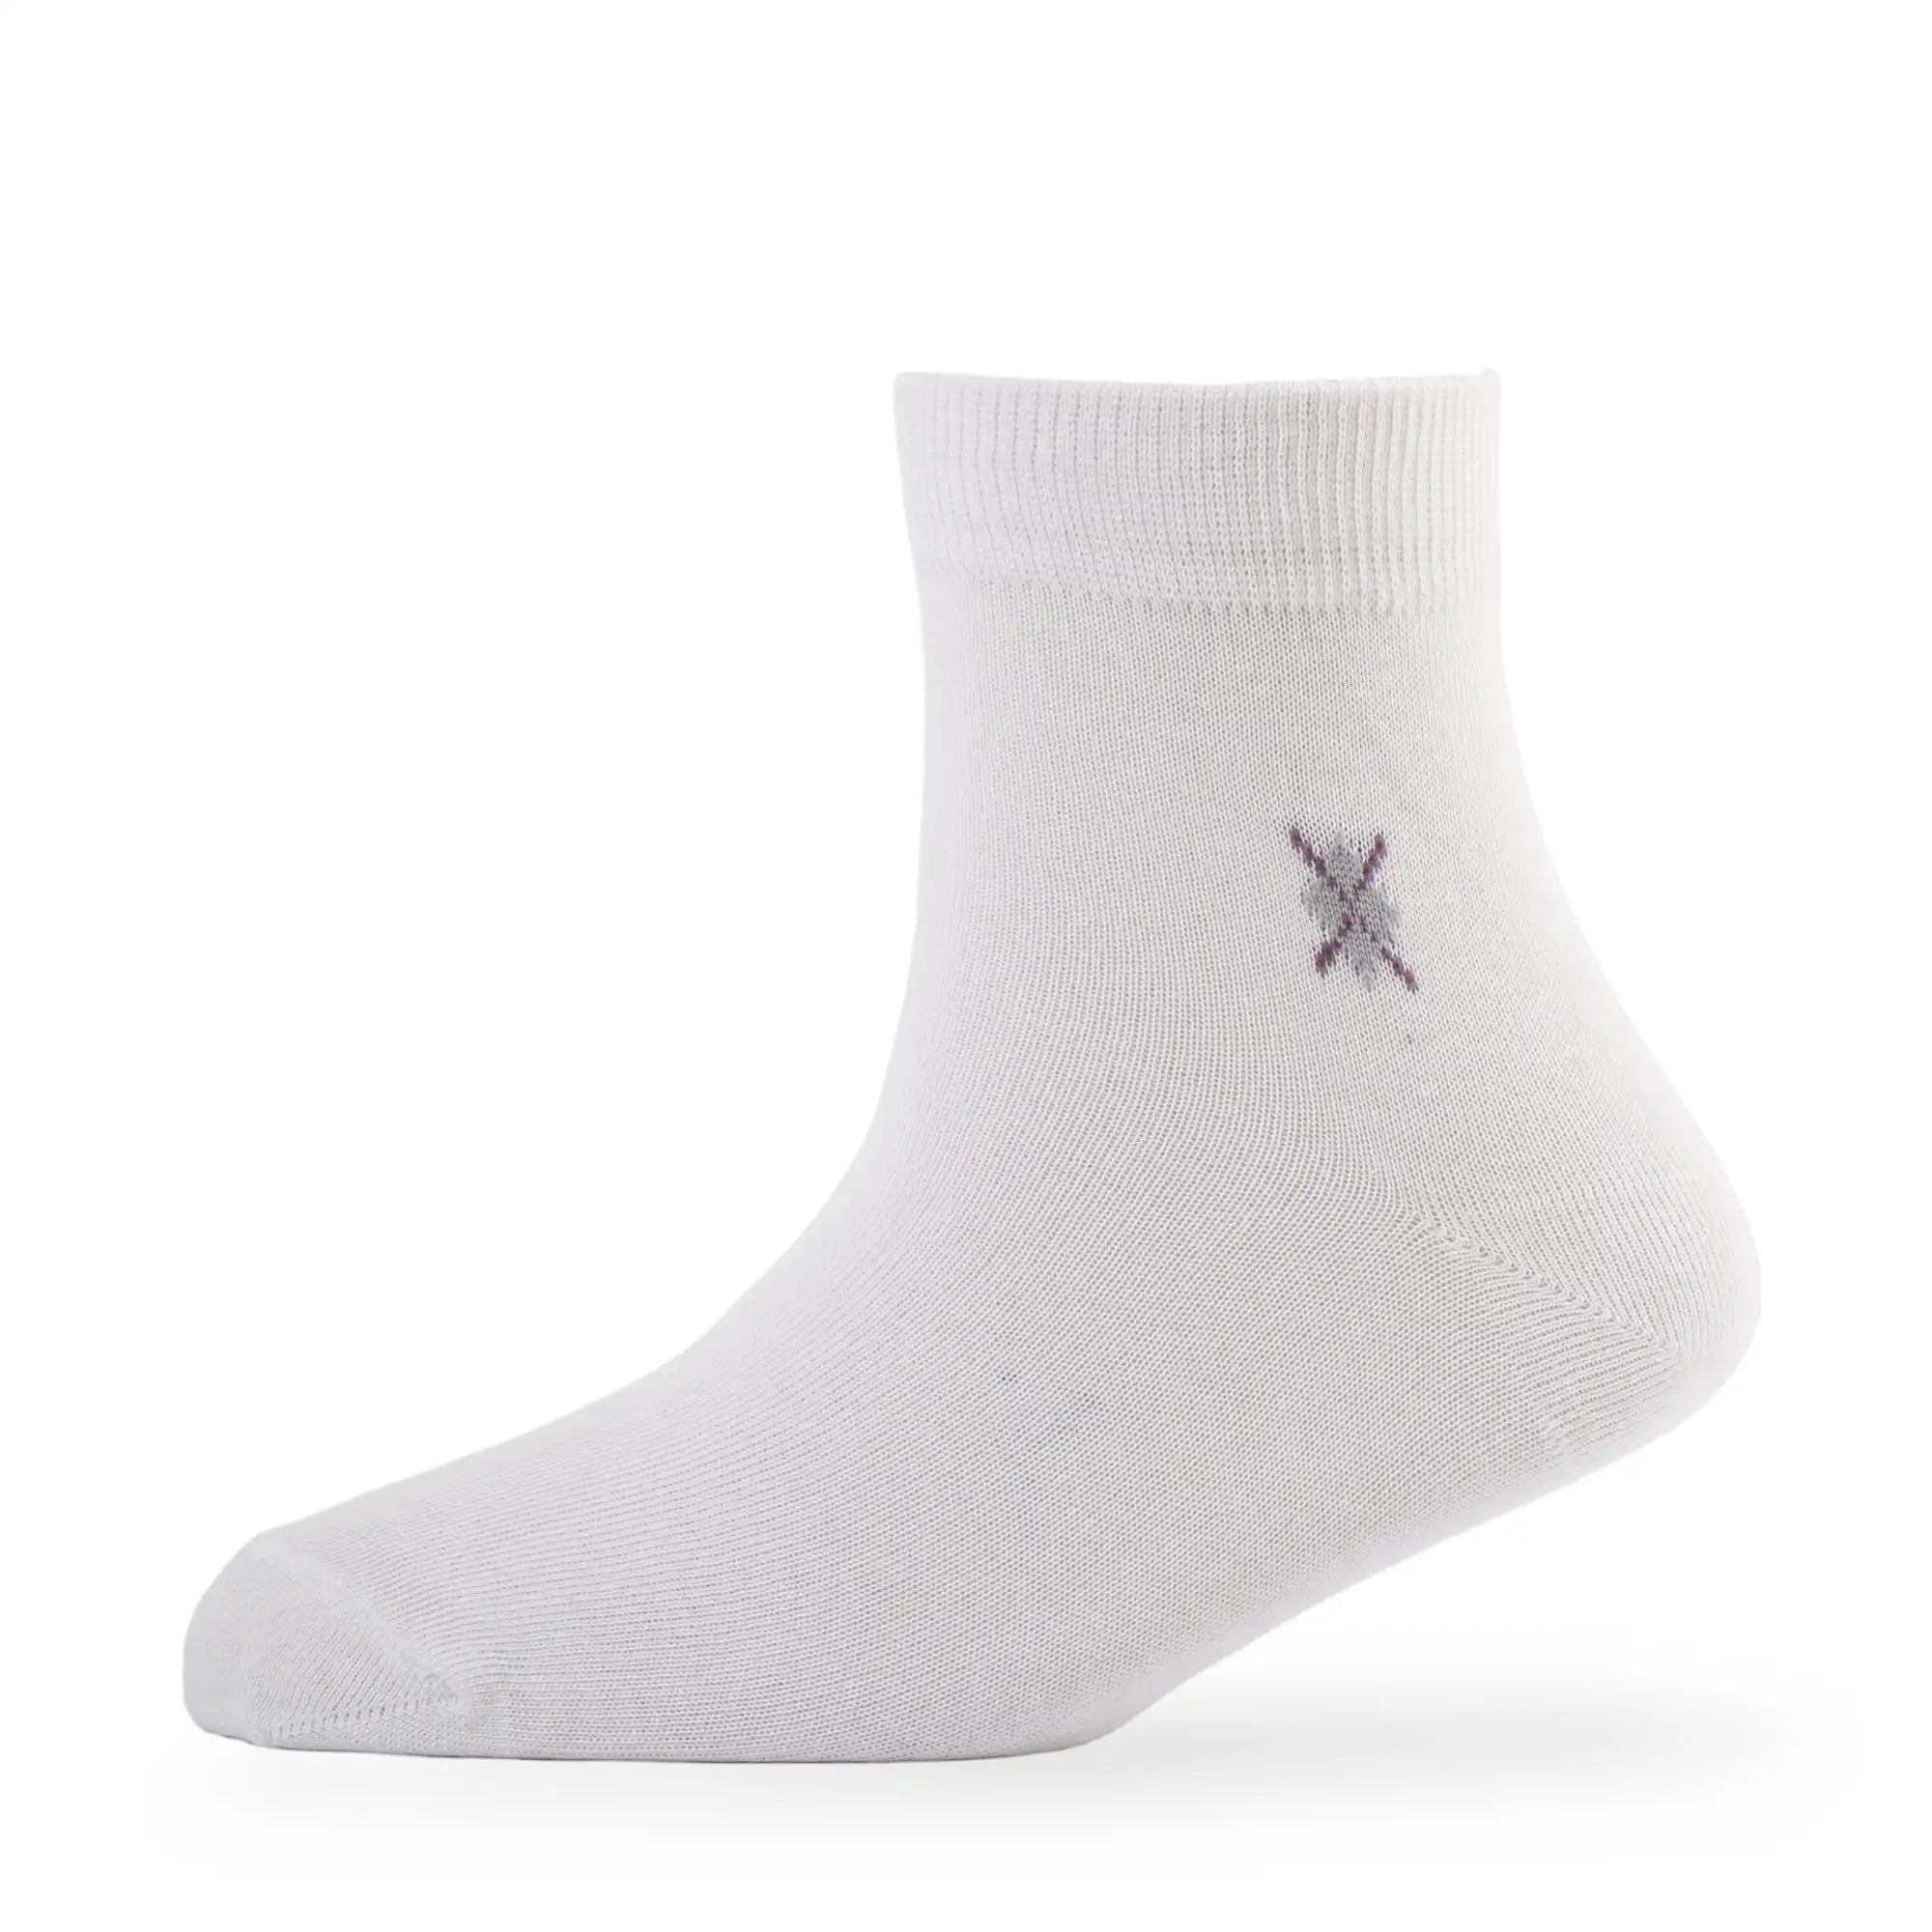 Young Wings Men's White Colour Cotton Fabric Solid Ankle Length Socks - Pack of 5, Style no. 2200-M1